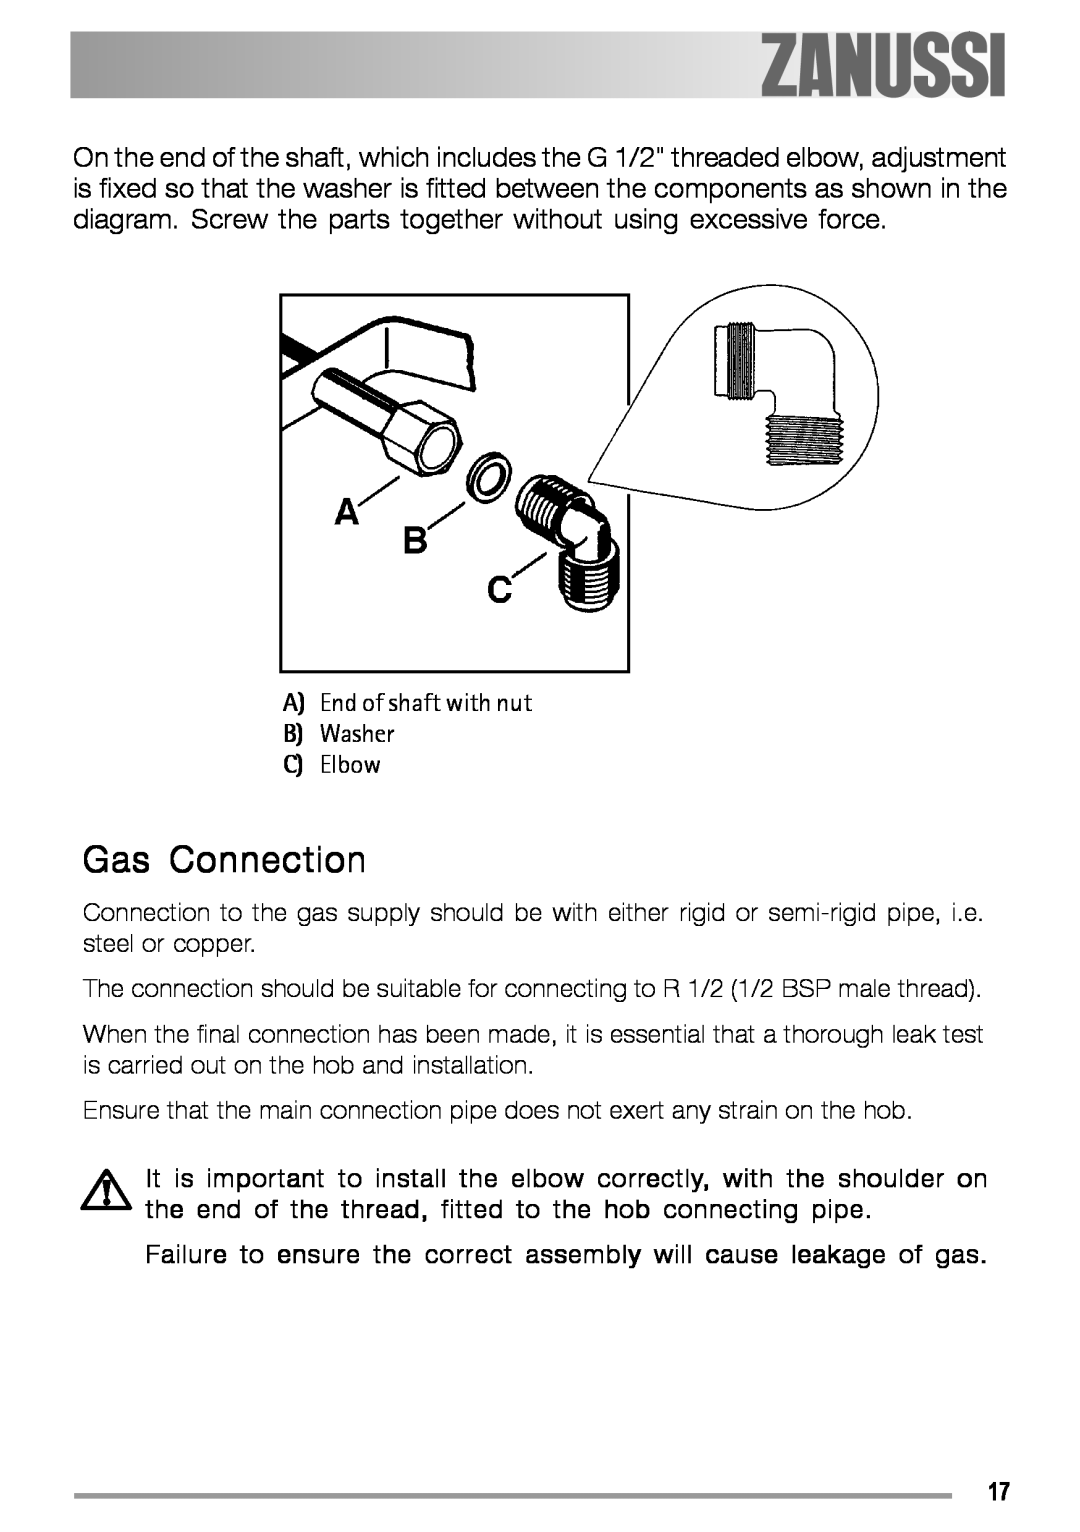 Zanussi ZGS 322 manual Gas Connection, Failure to ensure the correct assembly will cause leakage of gas 